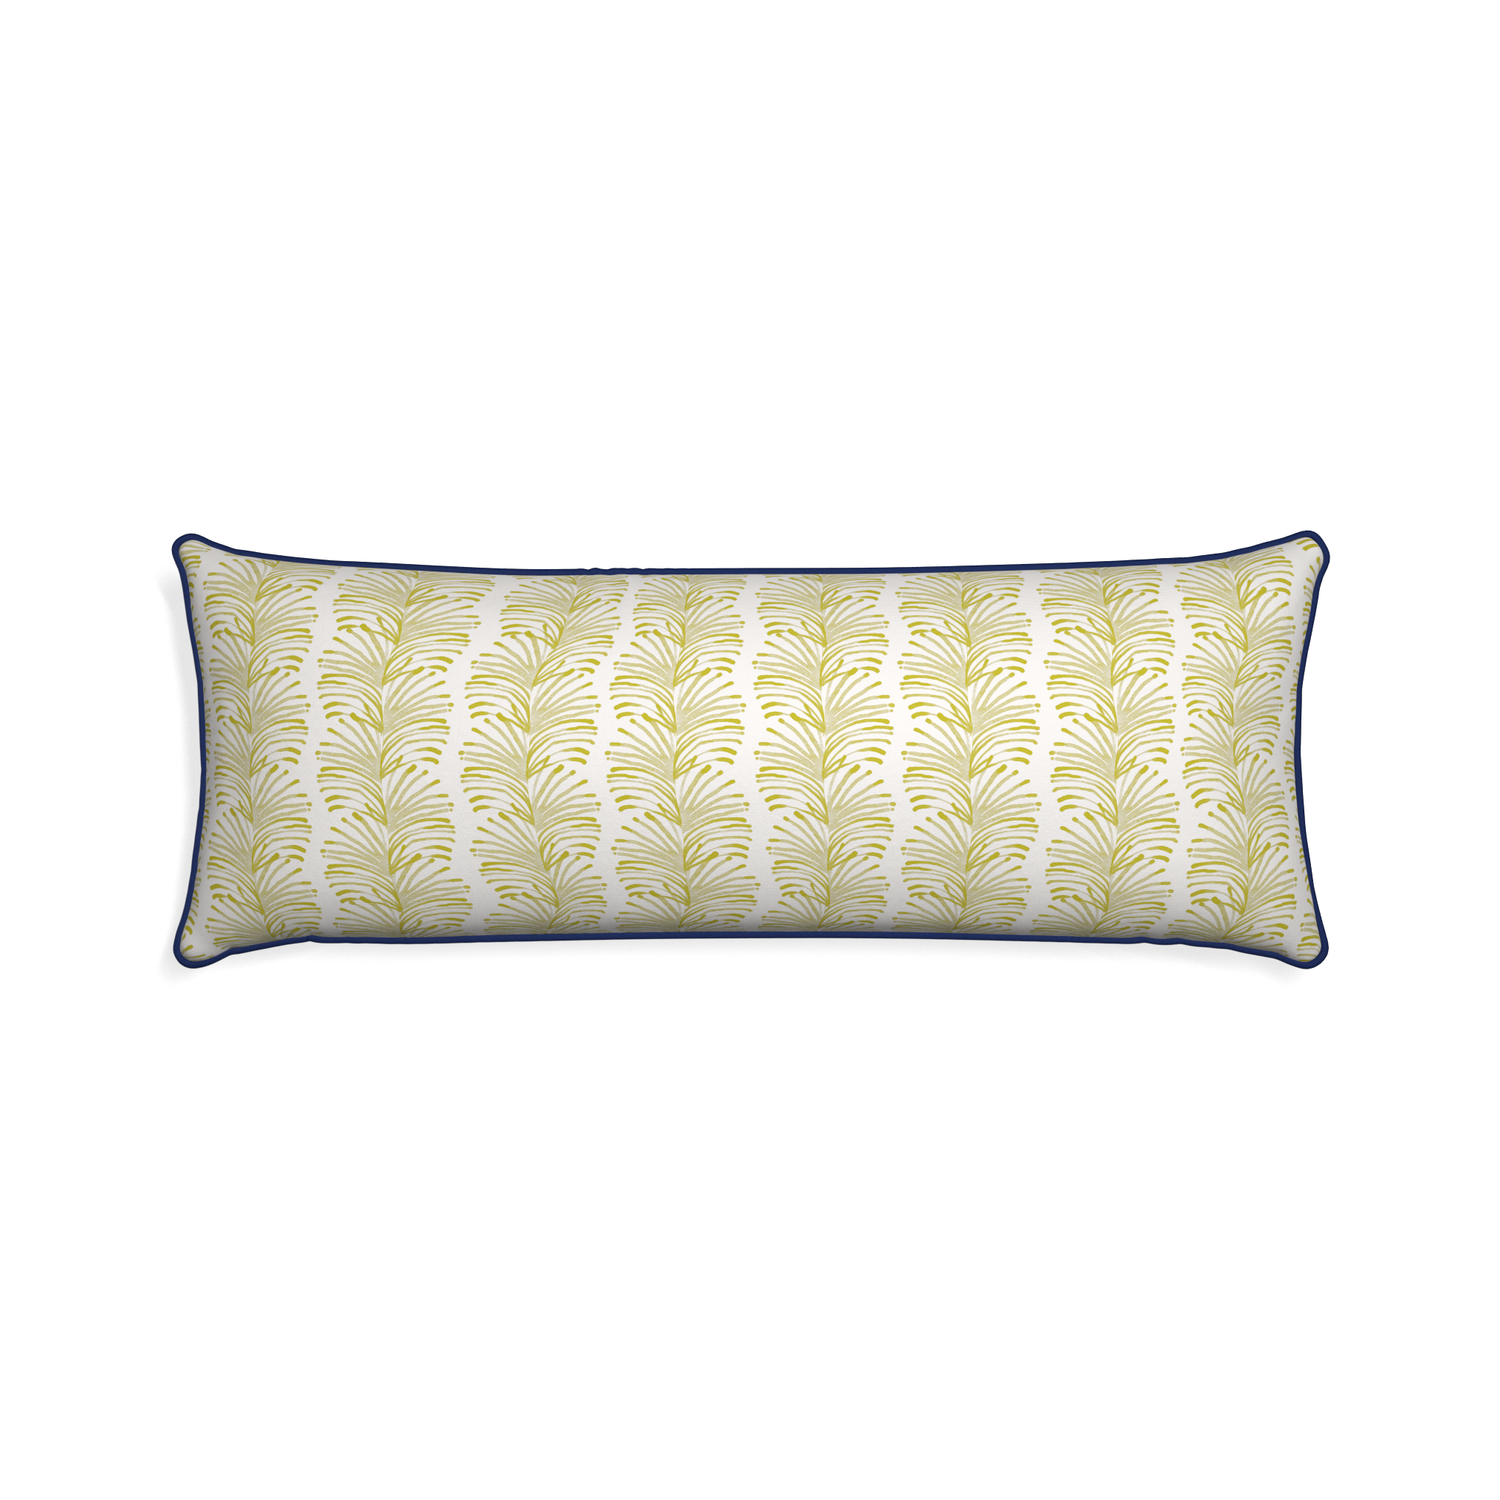 Xl-lumbar emma chartreuse custom pillow with midnight piping on white background